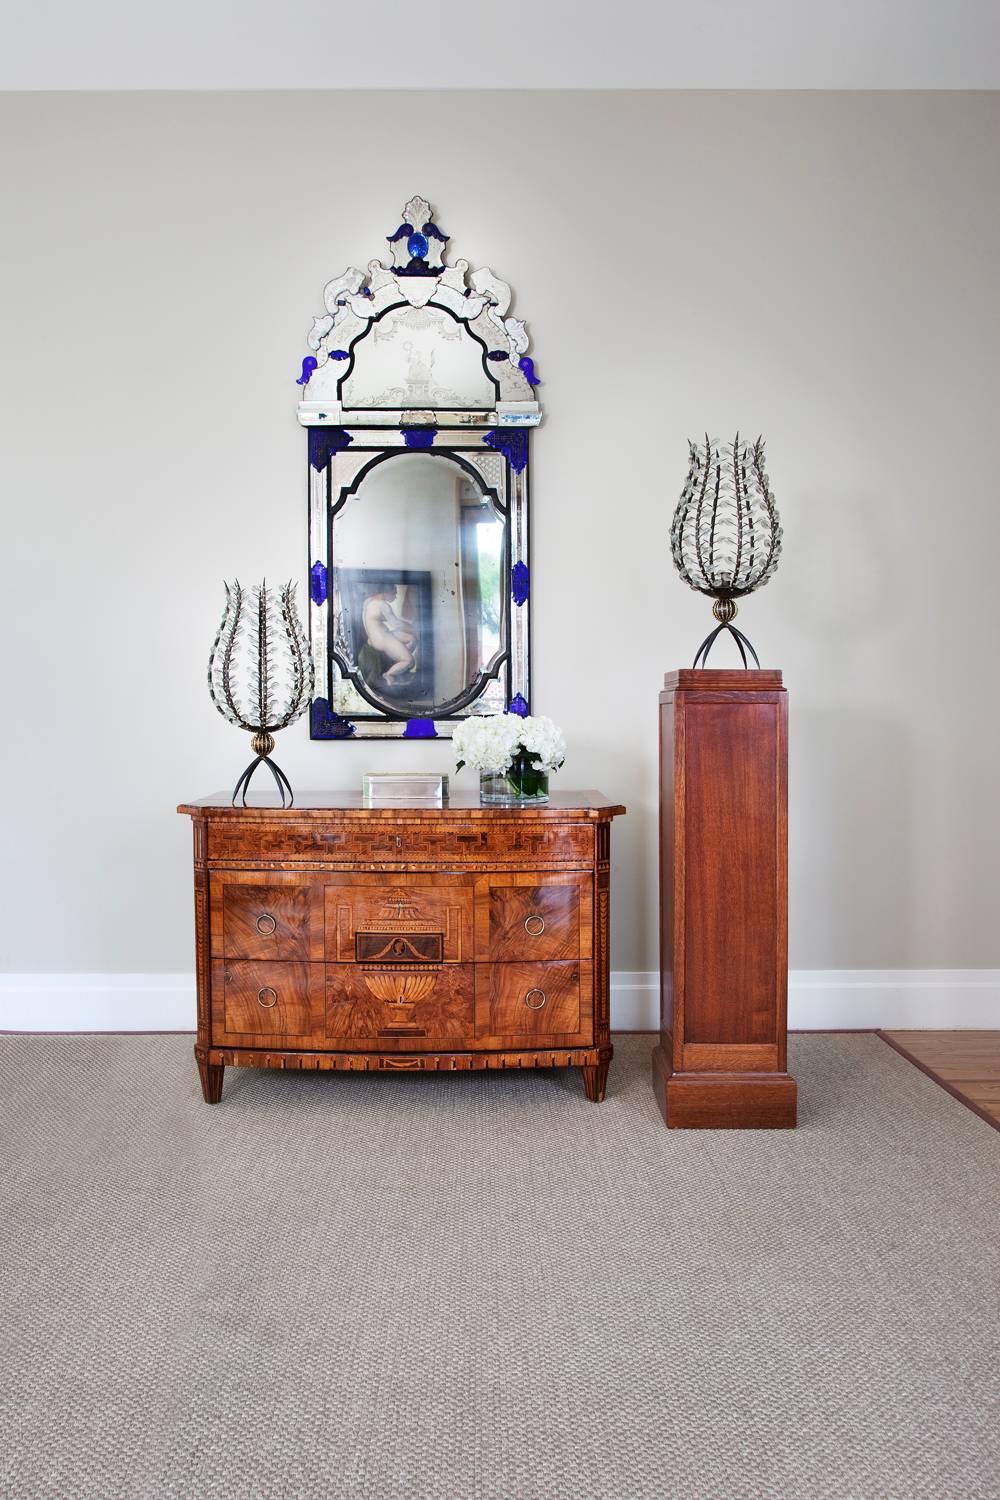 An important Baltic multifaceted mirror.
Finely etched and bevelled mirror facets,
surround the central bevelled mirror and upper pediment,
with beautiful bevelled and etched accents in,
brilliant cobalt blue glass.